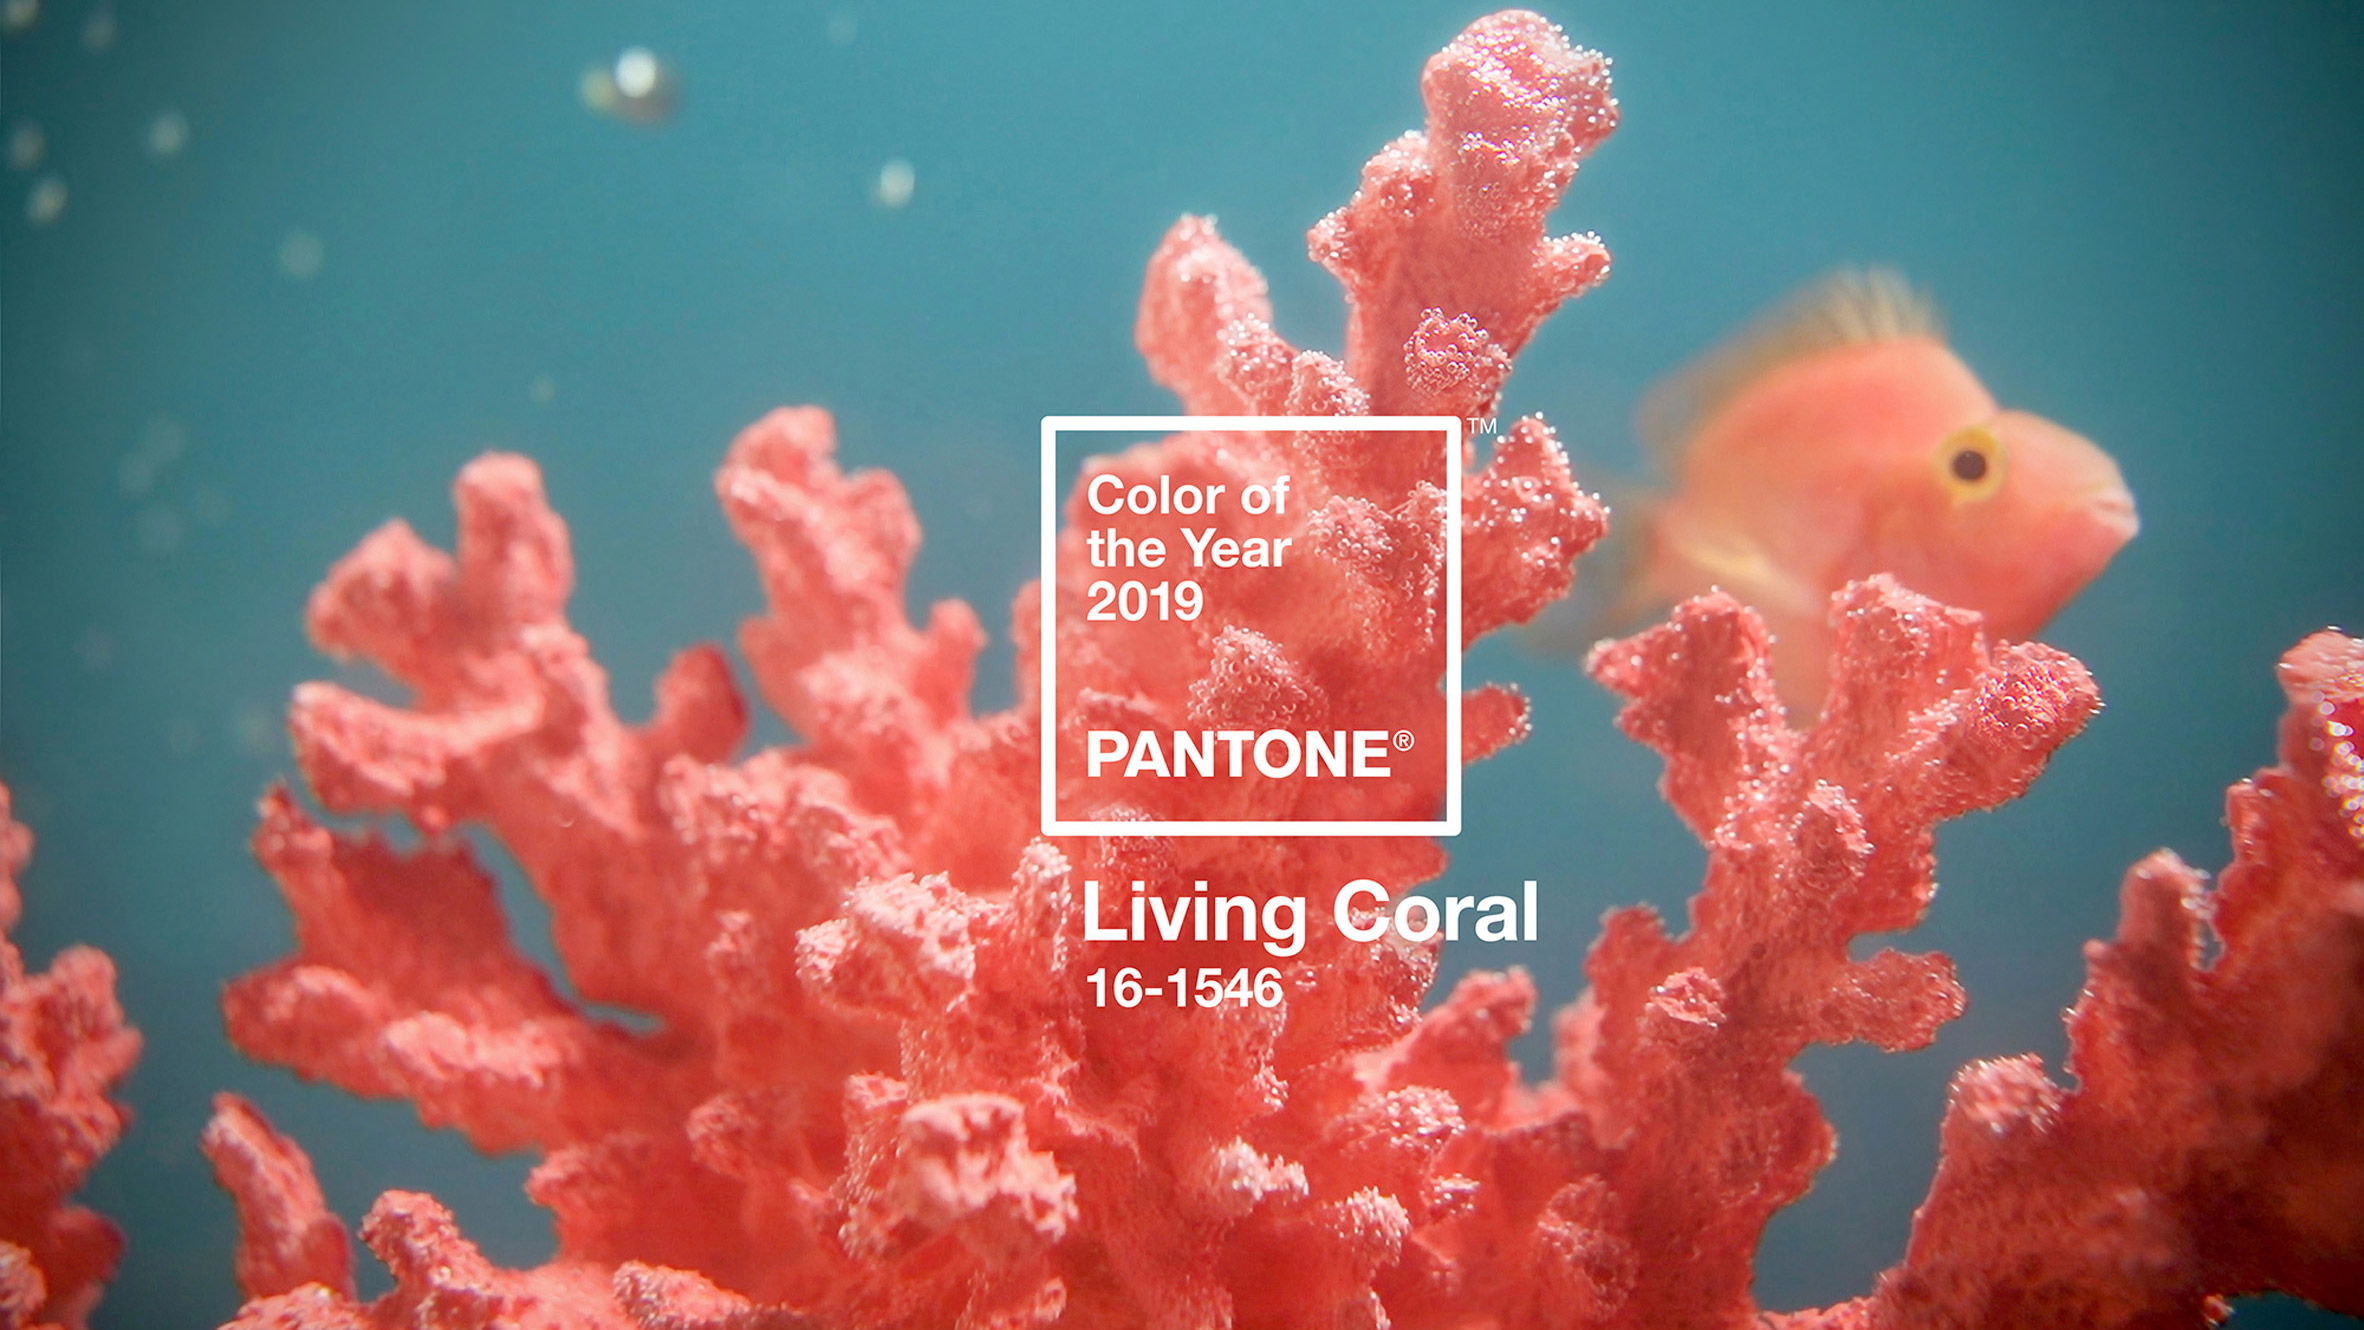 Living Coral is Pantone's colour of the year for 2019